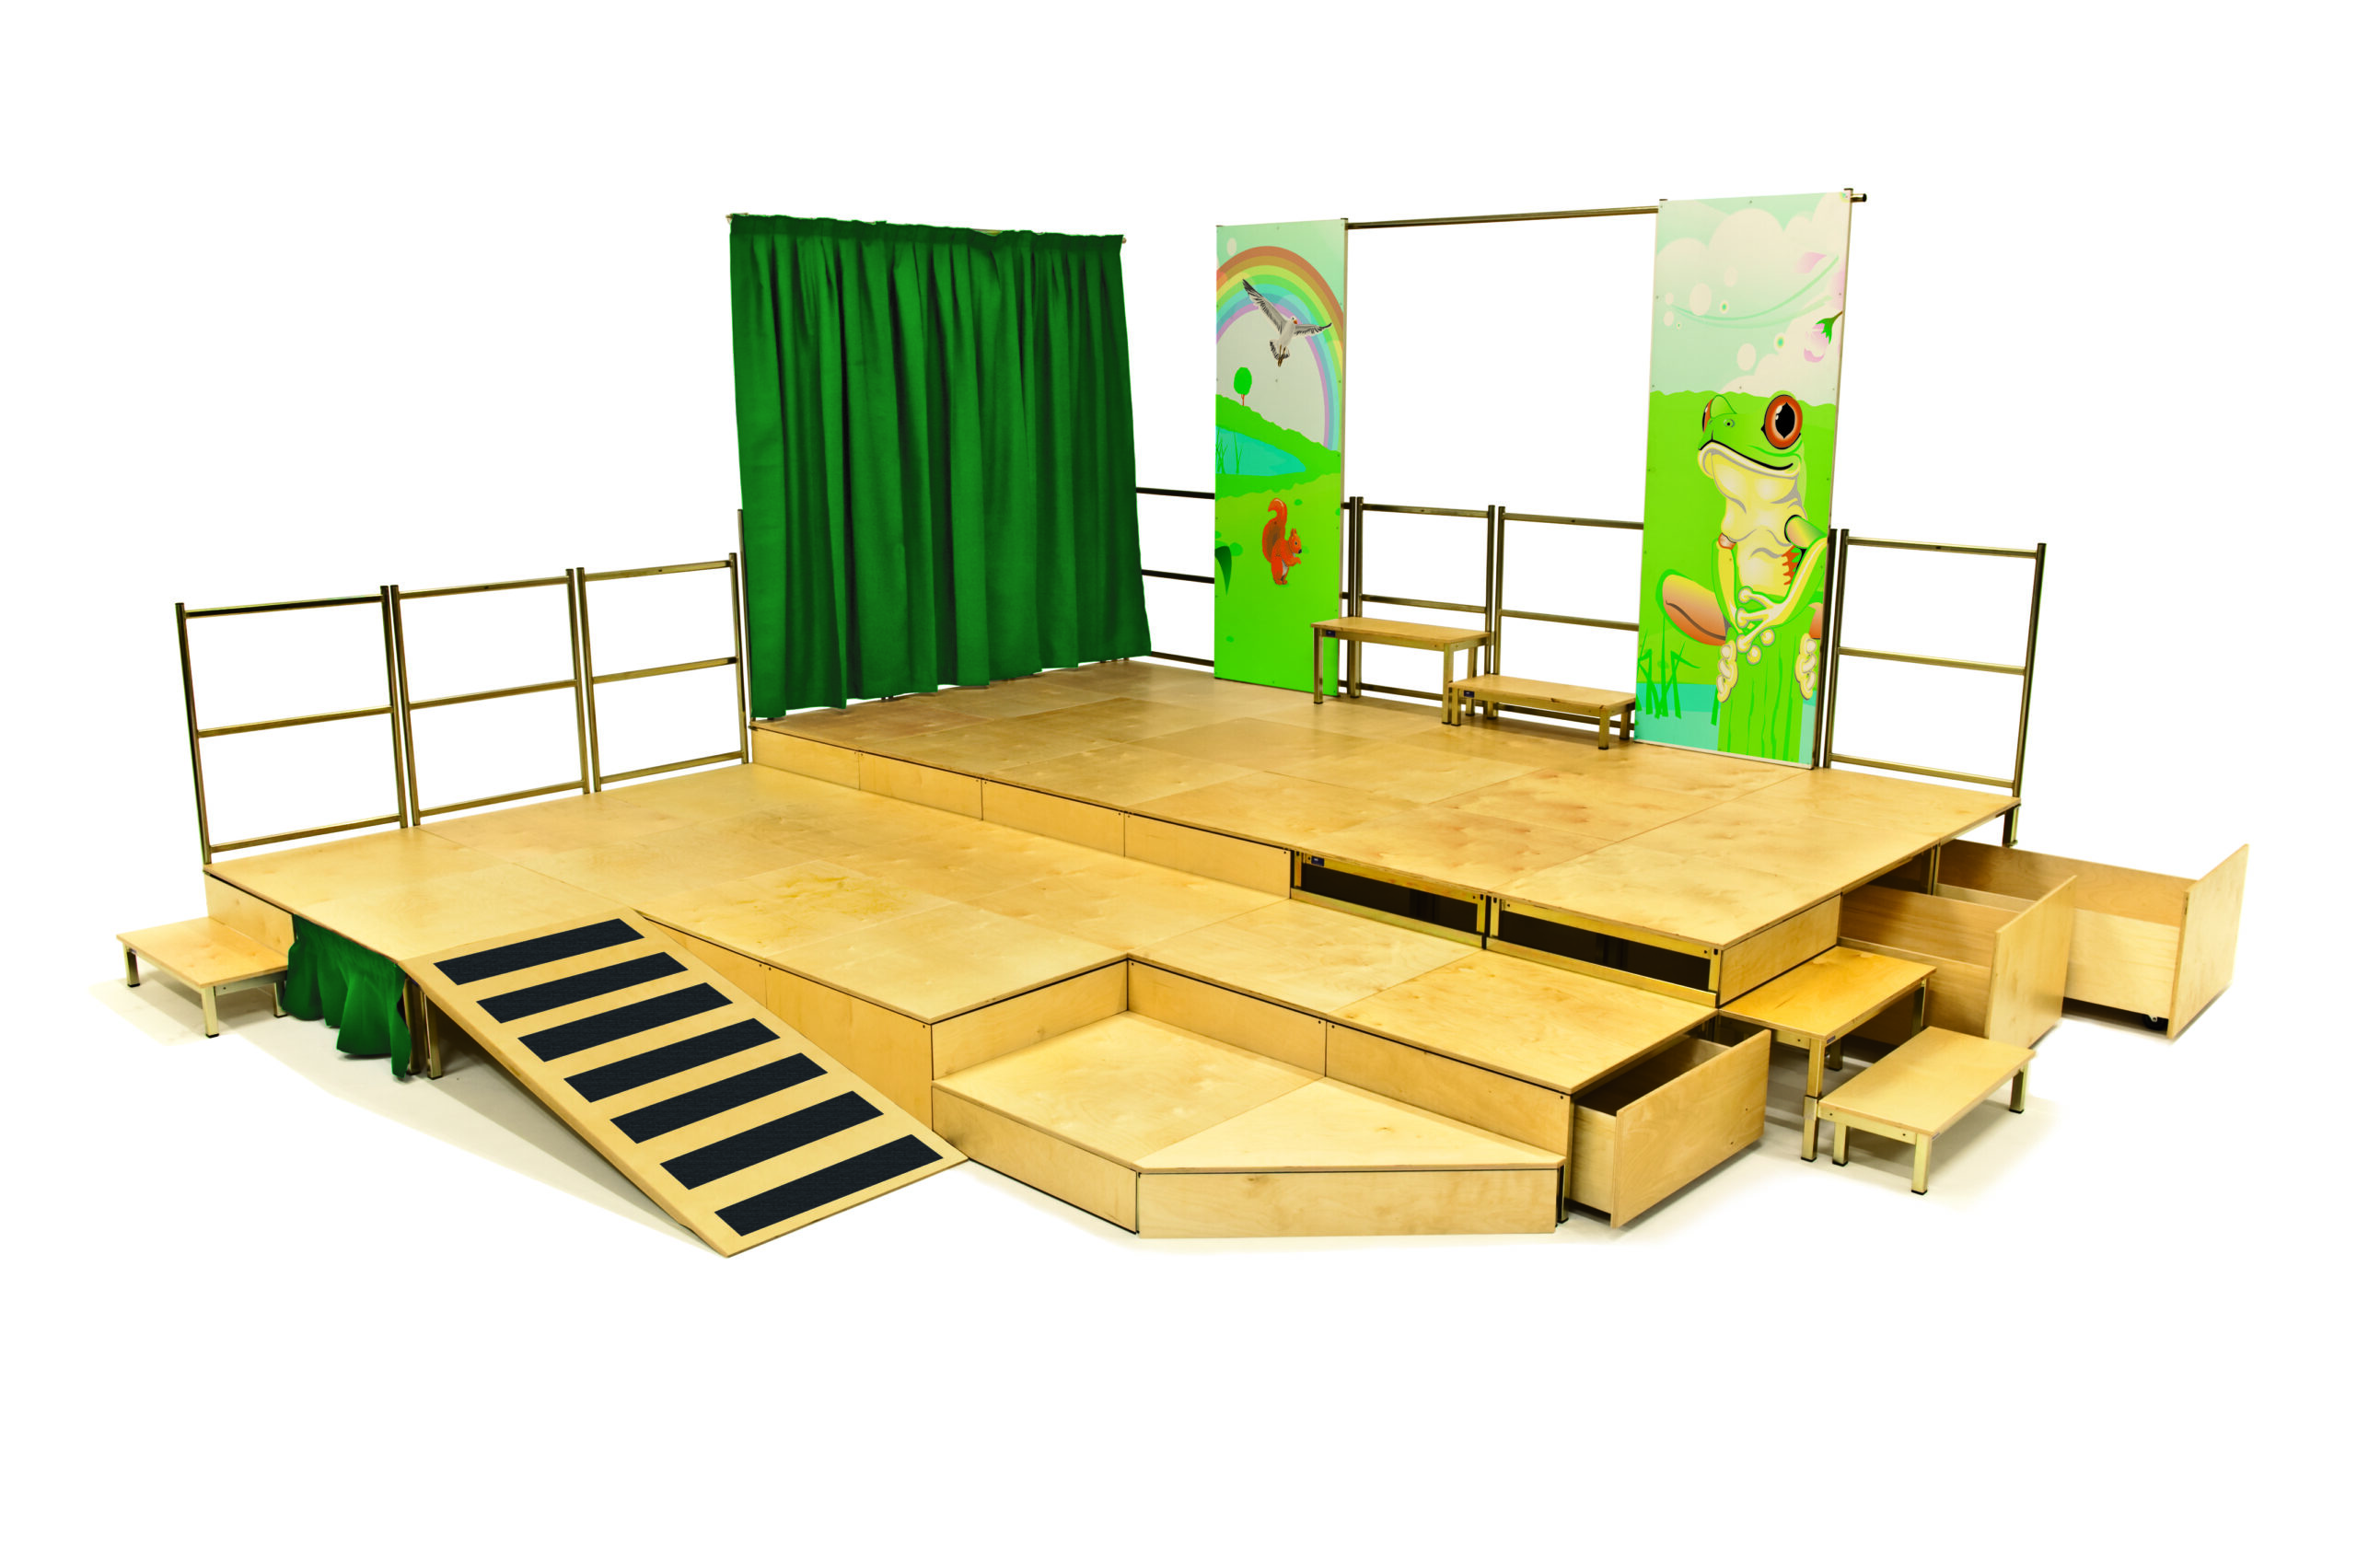 Creating visuals & products to inspire - Portable Staging | Modular Stages | Unistage Ltd